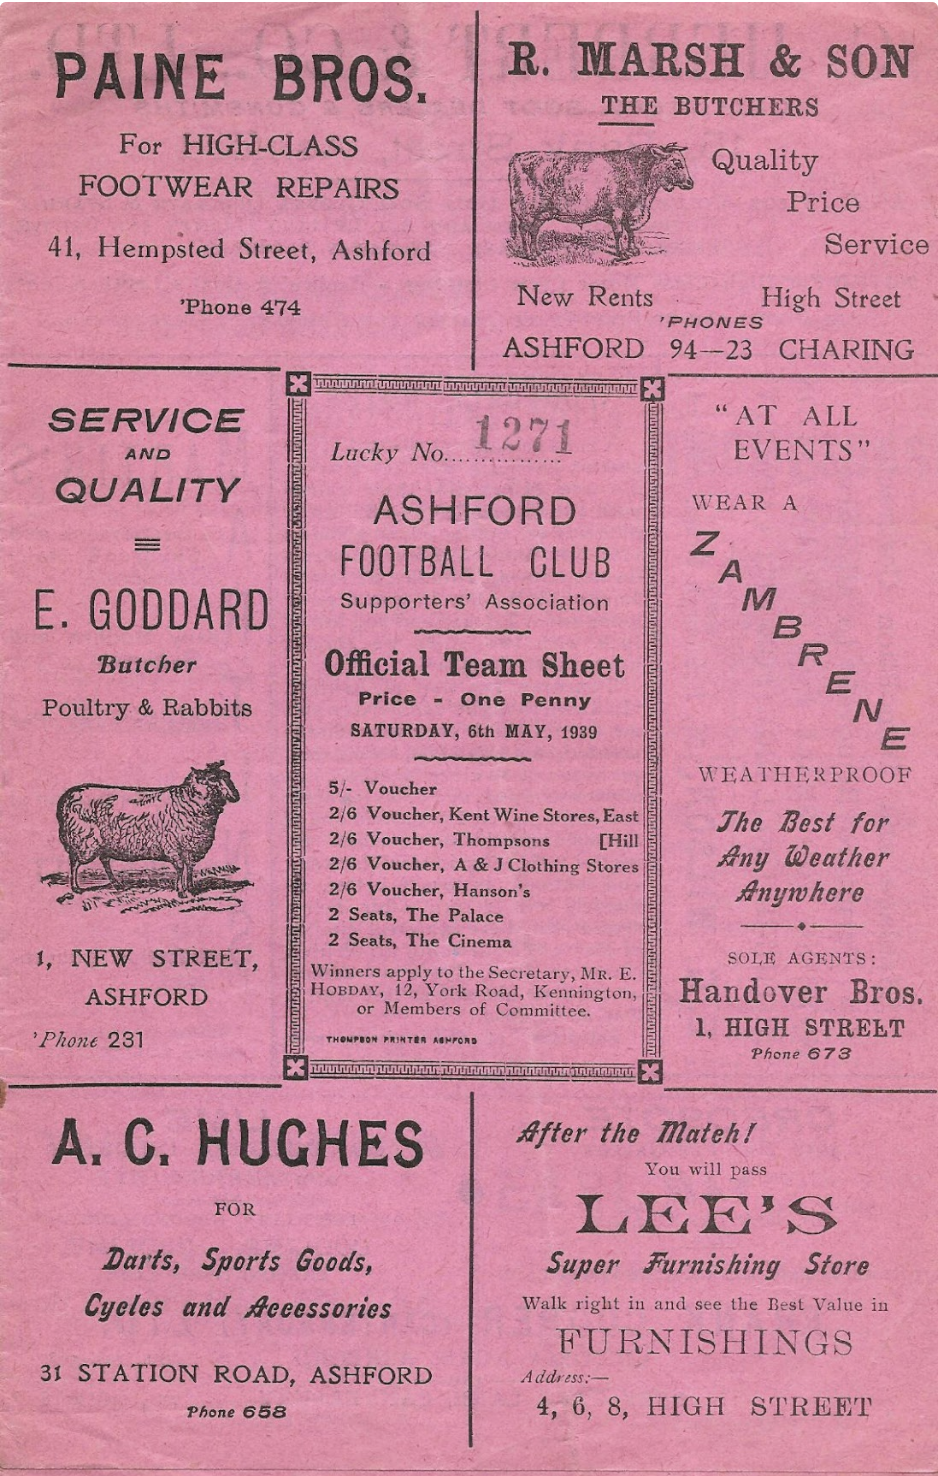 Home Programme 1938/39